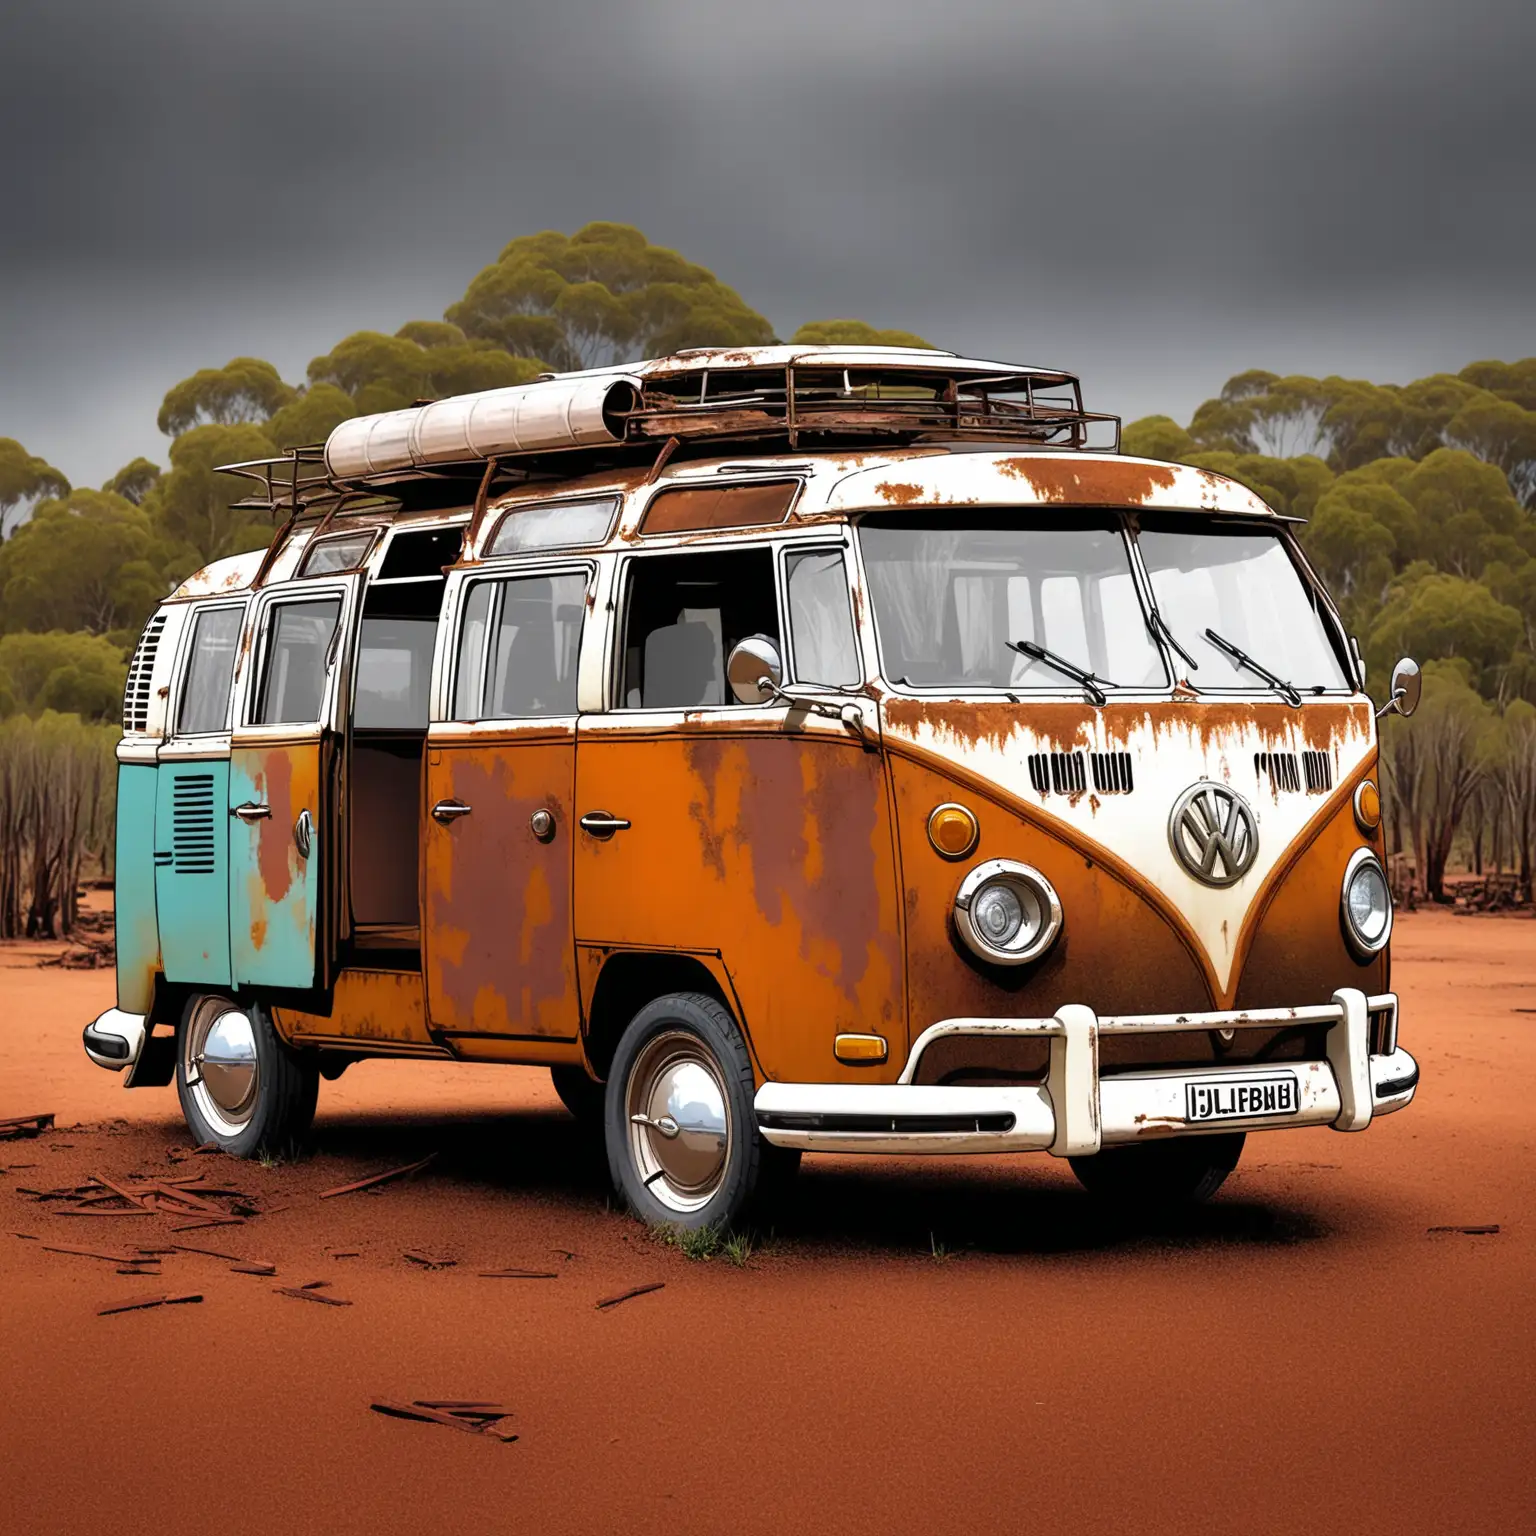  create a picture of an old rusty Kombi
